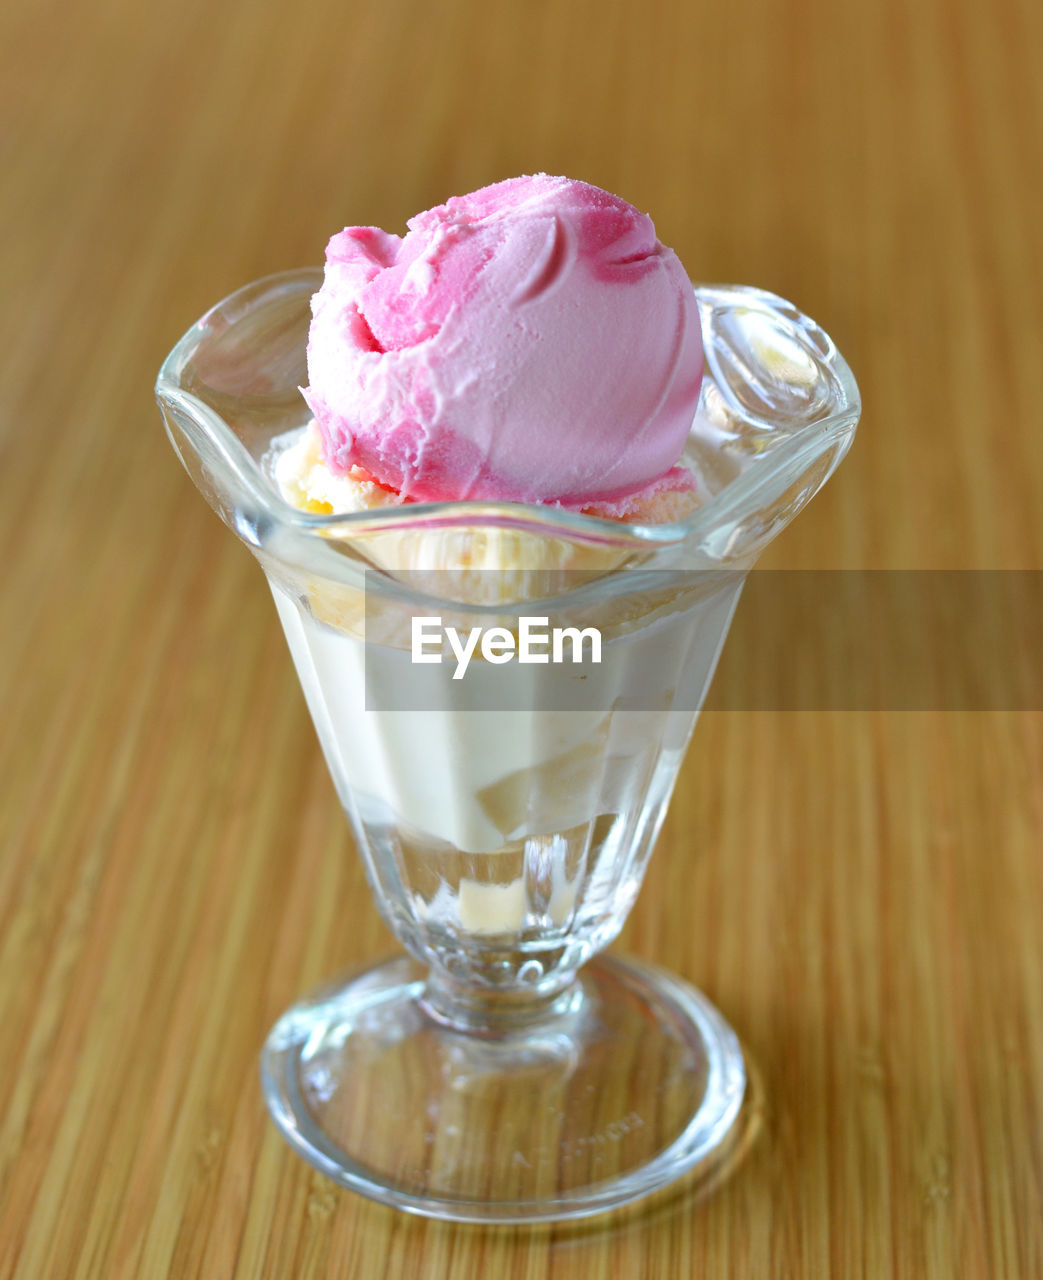 ICE CREAM IN GLASS ON TABLE